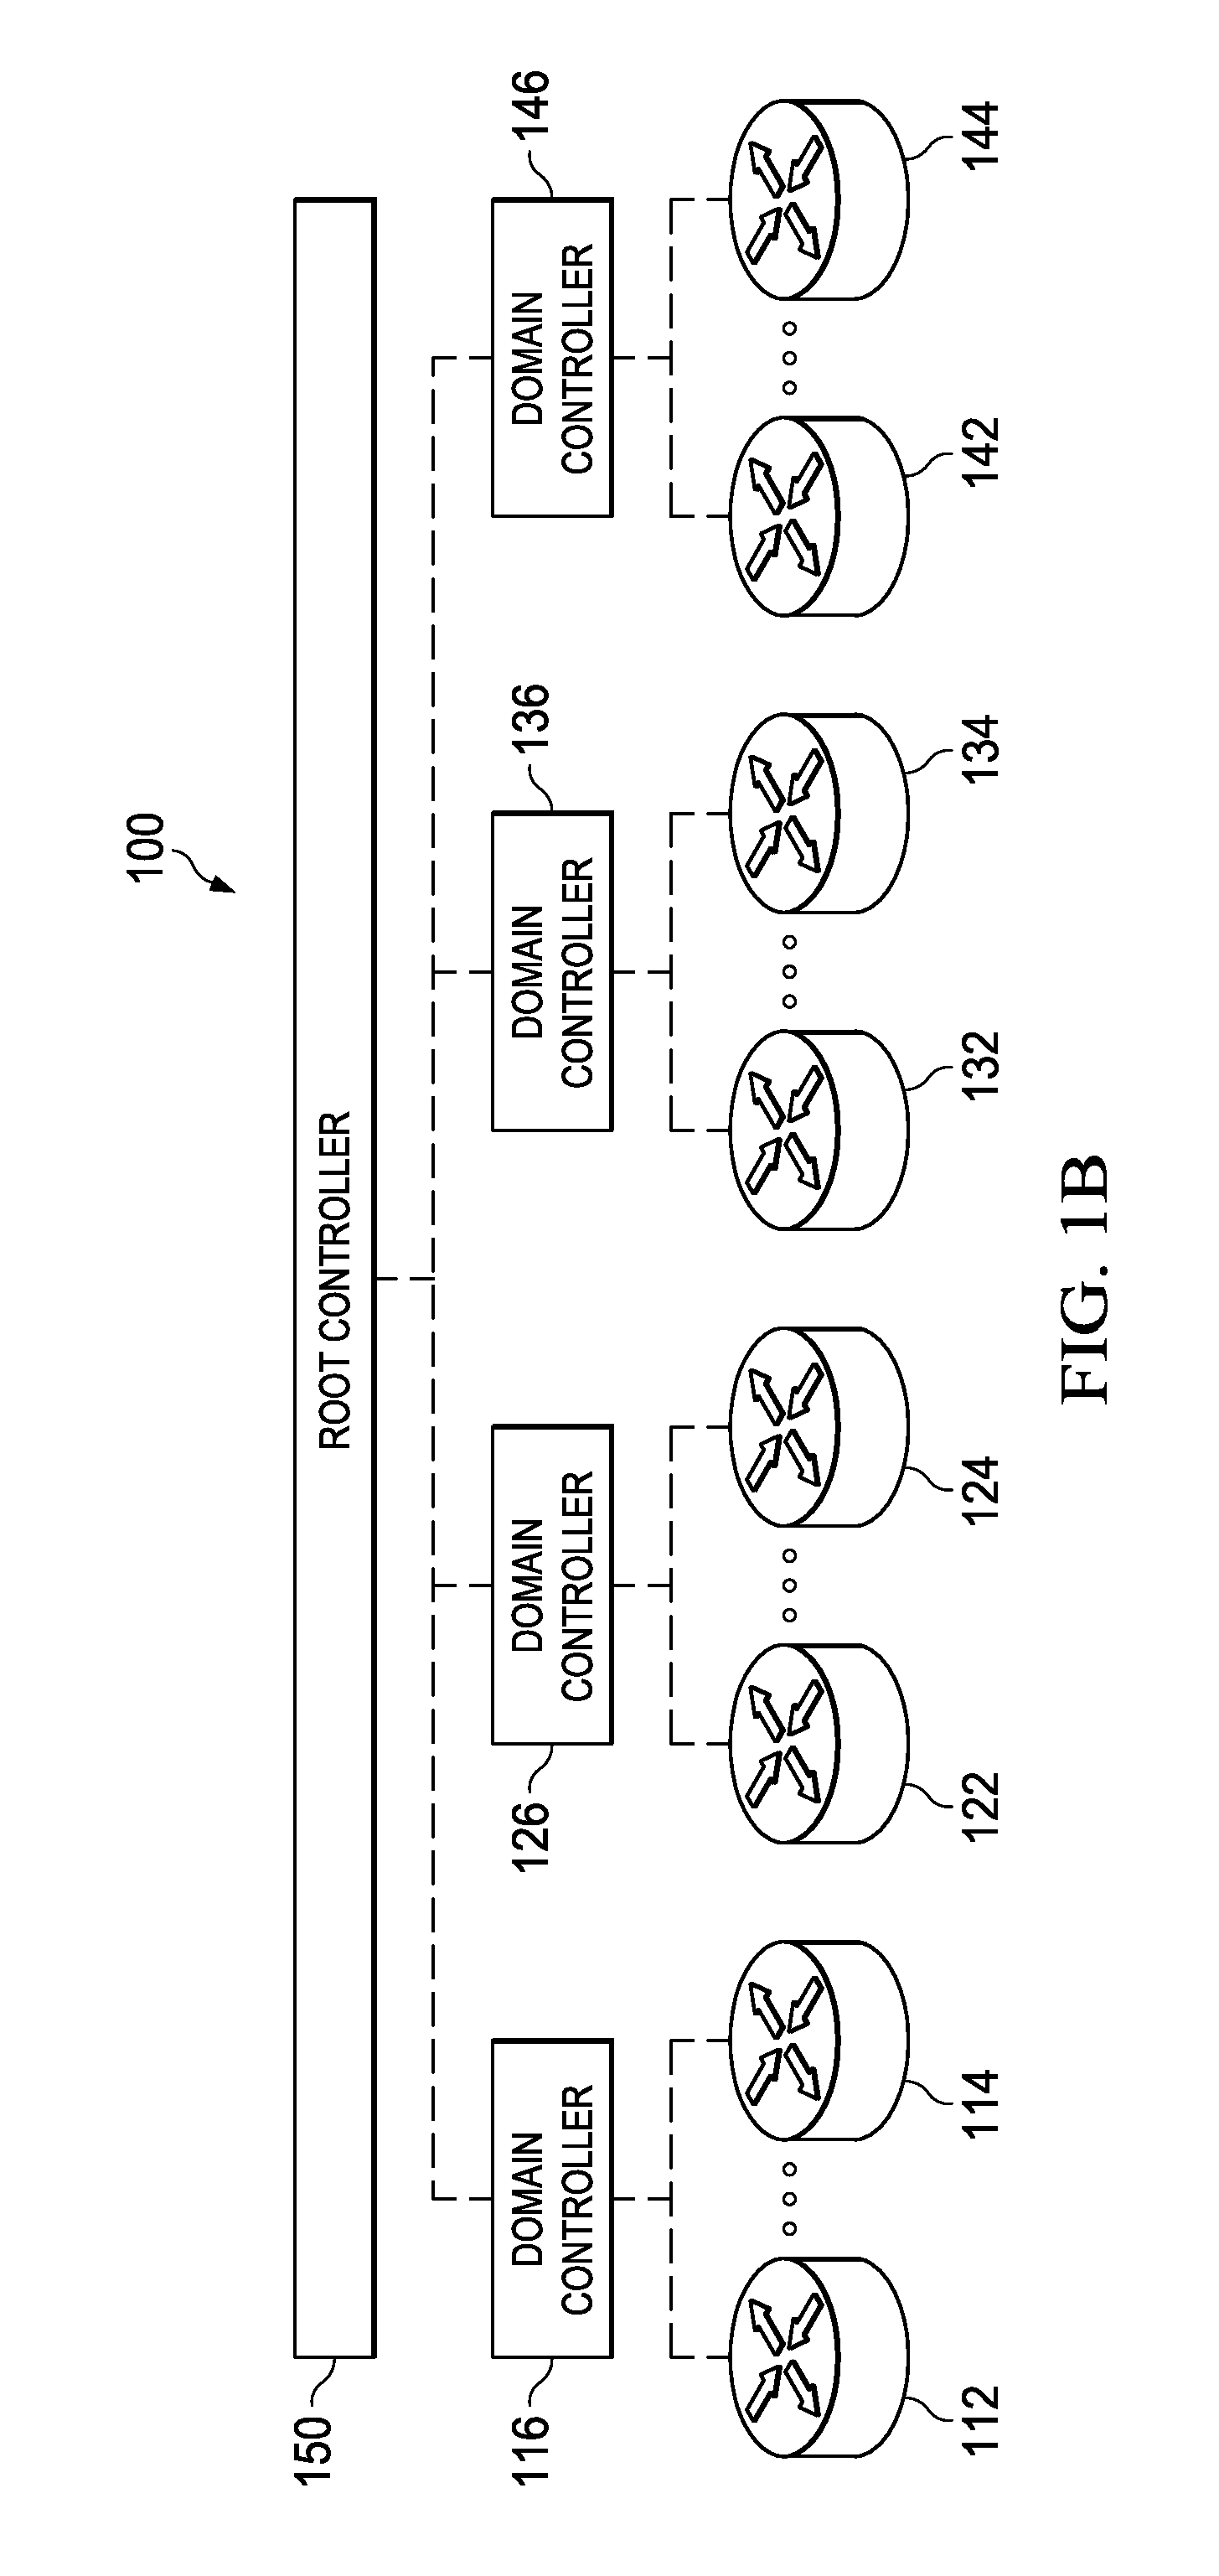 Multi-Domain Source Routed Forwarding Based on Collaborating Network Controllers